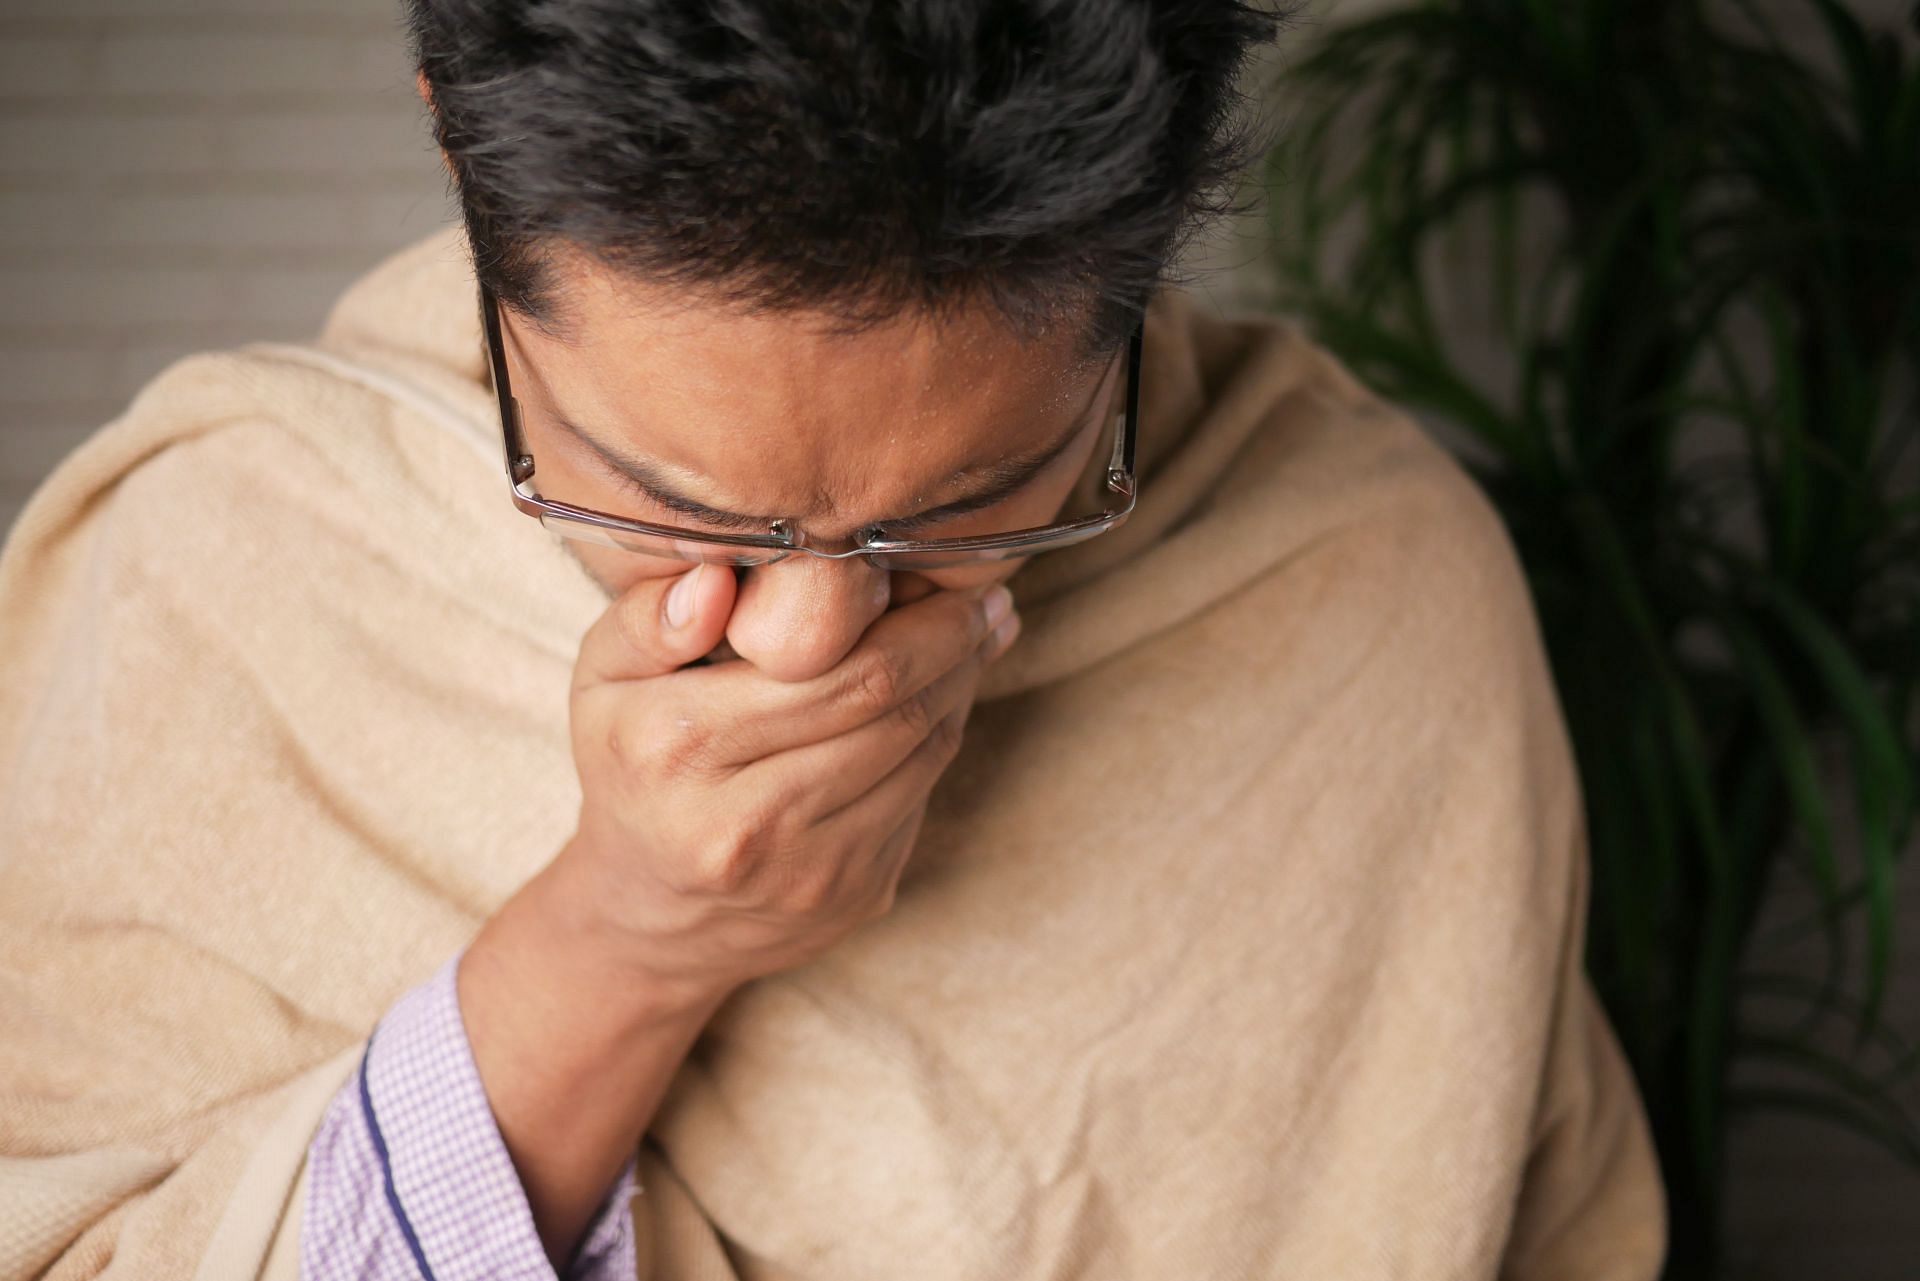 Stuffy nose can be annoying and frequently interfere with day-to-day activities. (Image via Pexels/ Towfiqu Barbhuiya)